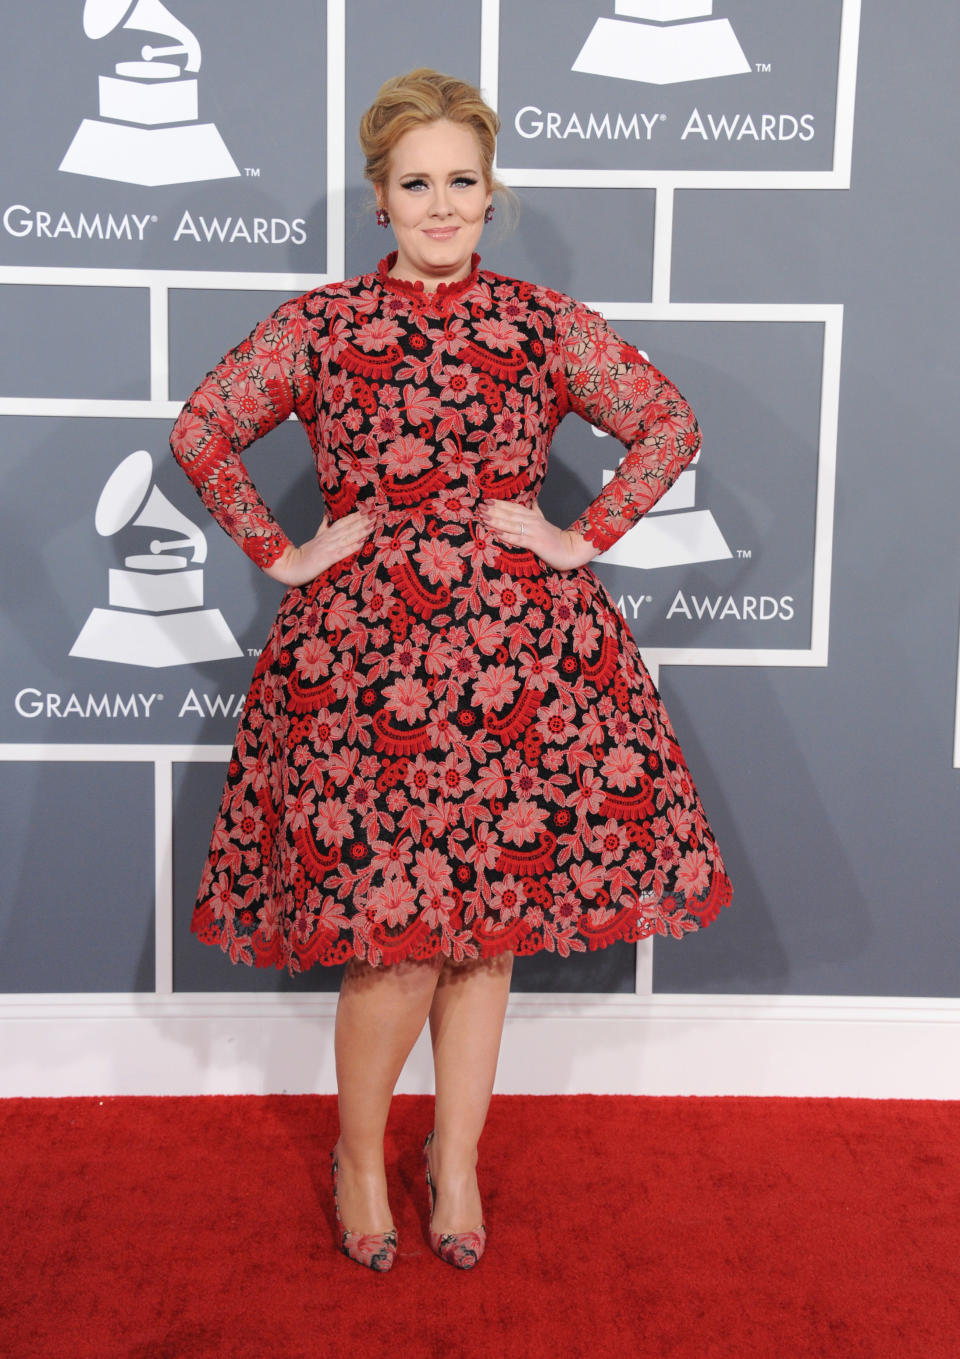 Adele at the Grammy Awards in 2013. (Photo: Invision/AP)